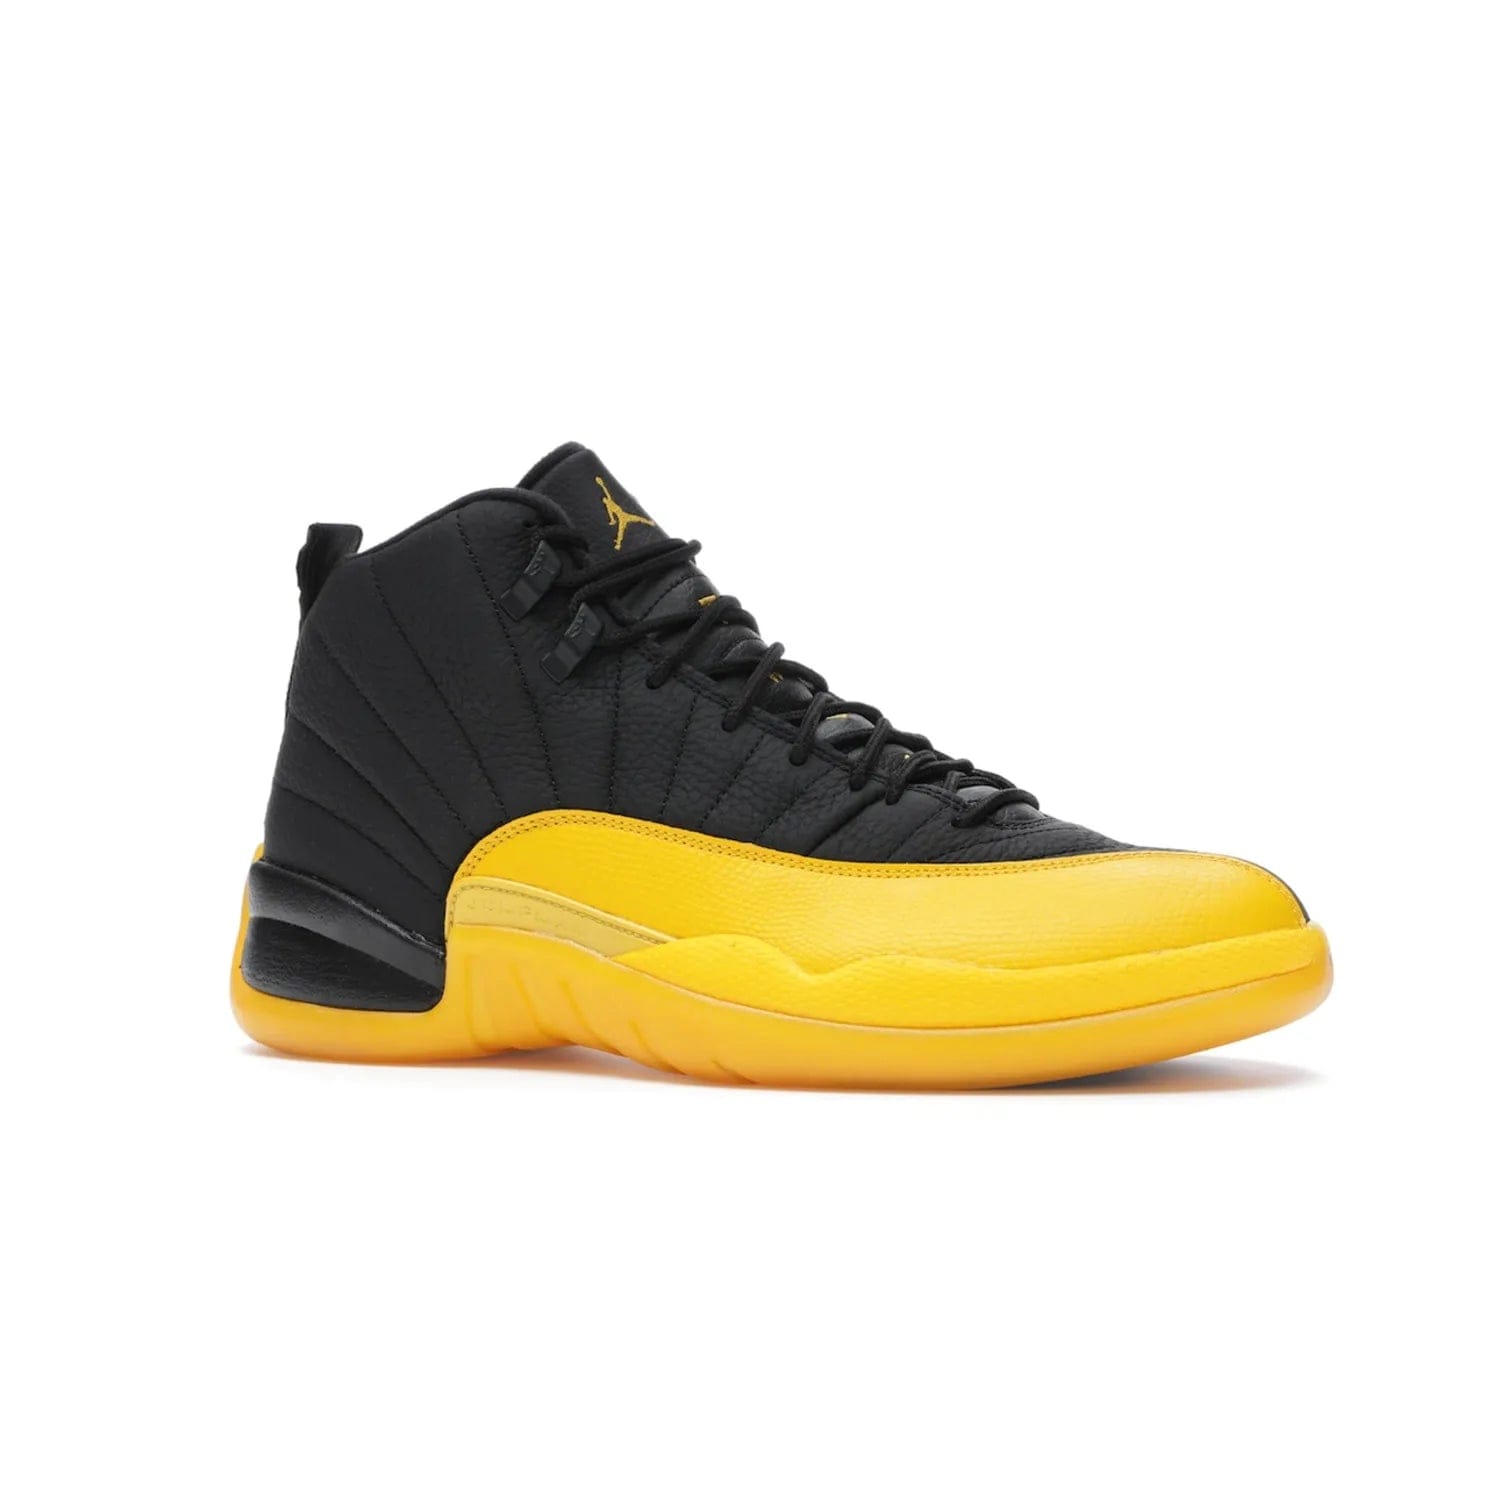 Jordan 12 Retro Black University Gold - Image 3 - Only at www.BallersClubKickz.com - This Jordan 12 Retro features a black tumbled leather upper and University Gold accents for a modern twist. Boasting Jordan "Two Three" branding and a yellow sole, these shoes will elevate your wardrobe. Fresh, sleek, and one of a kind - the Jordan 12 University Gold is your summer sneaker.